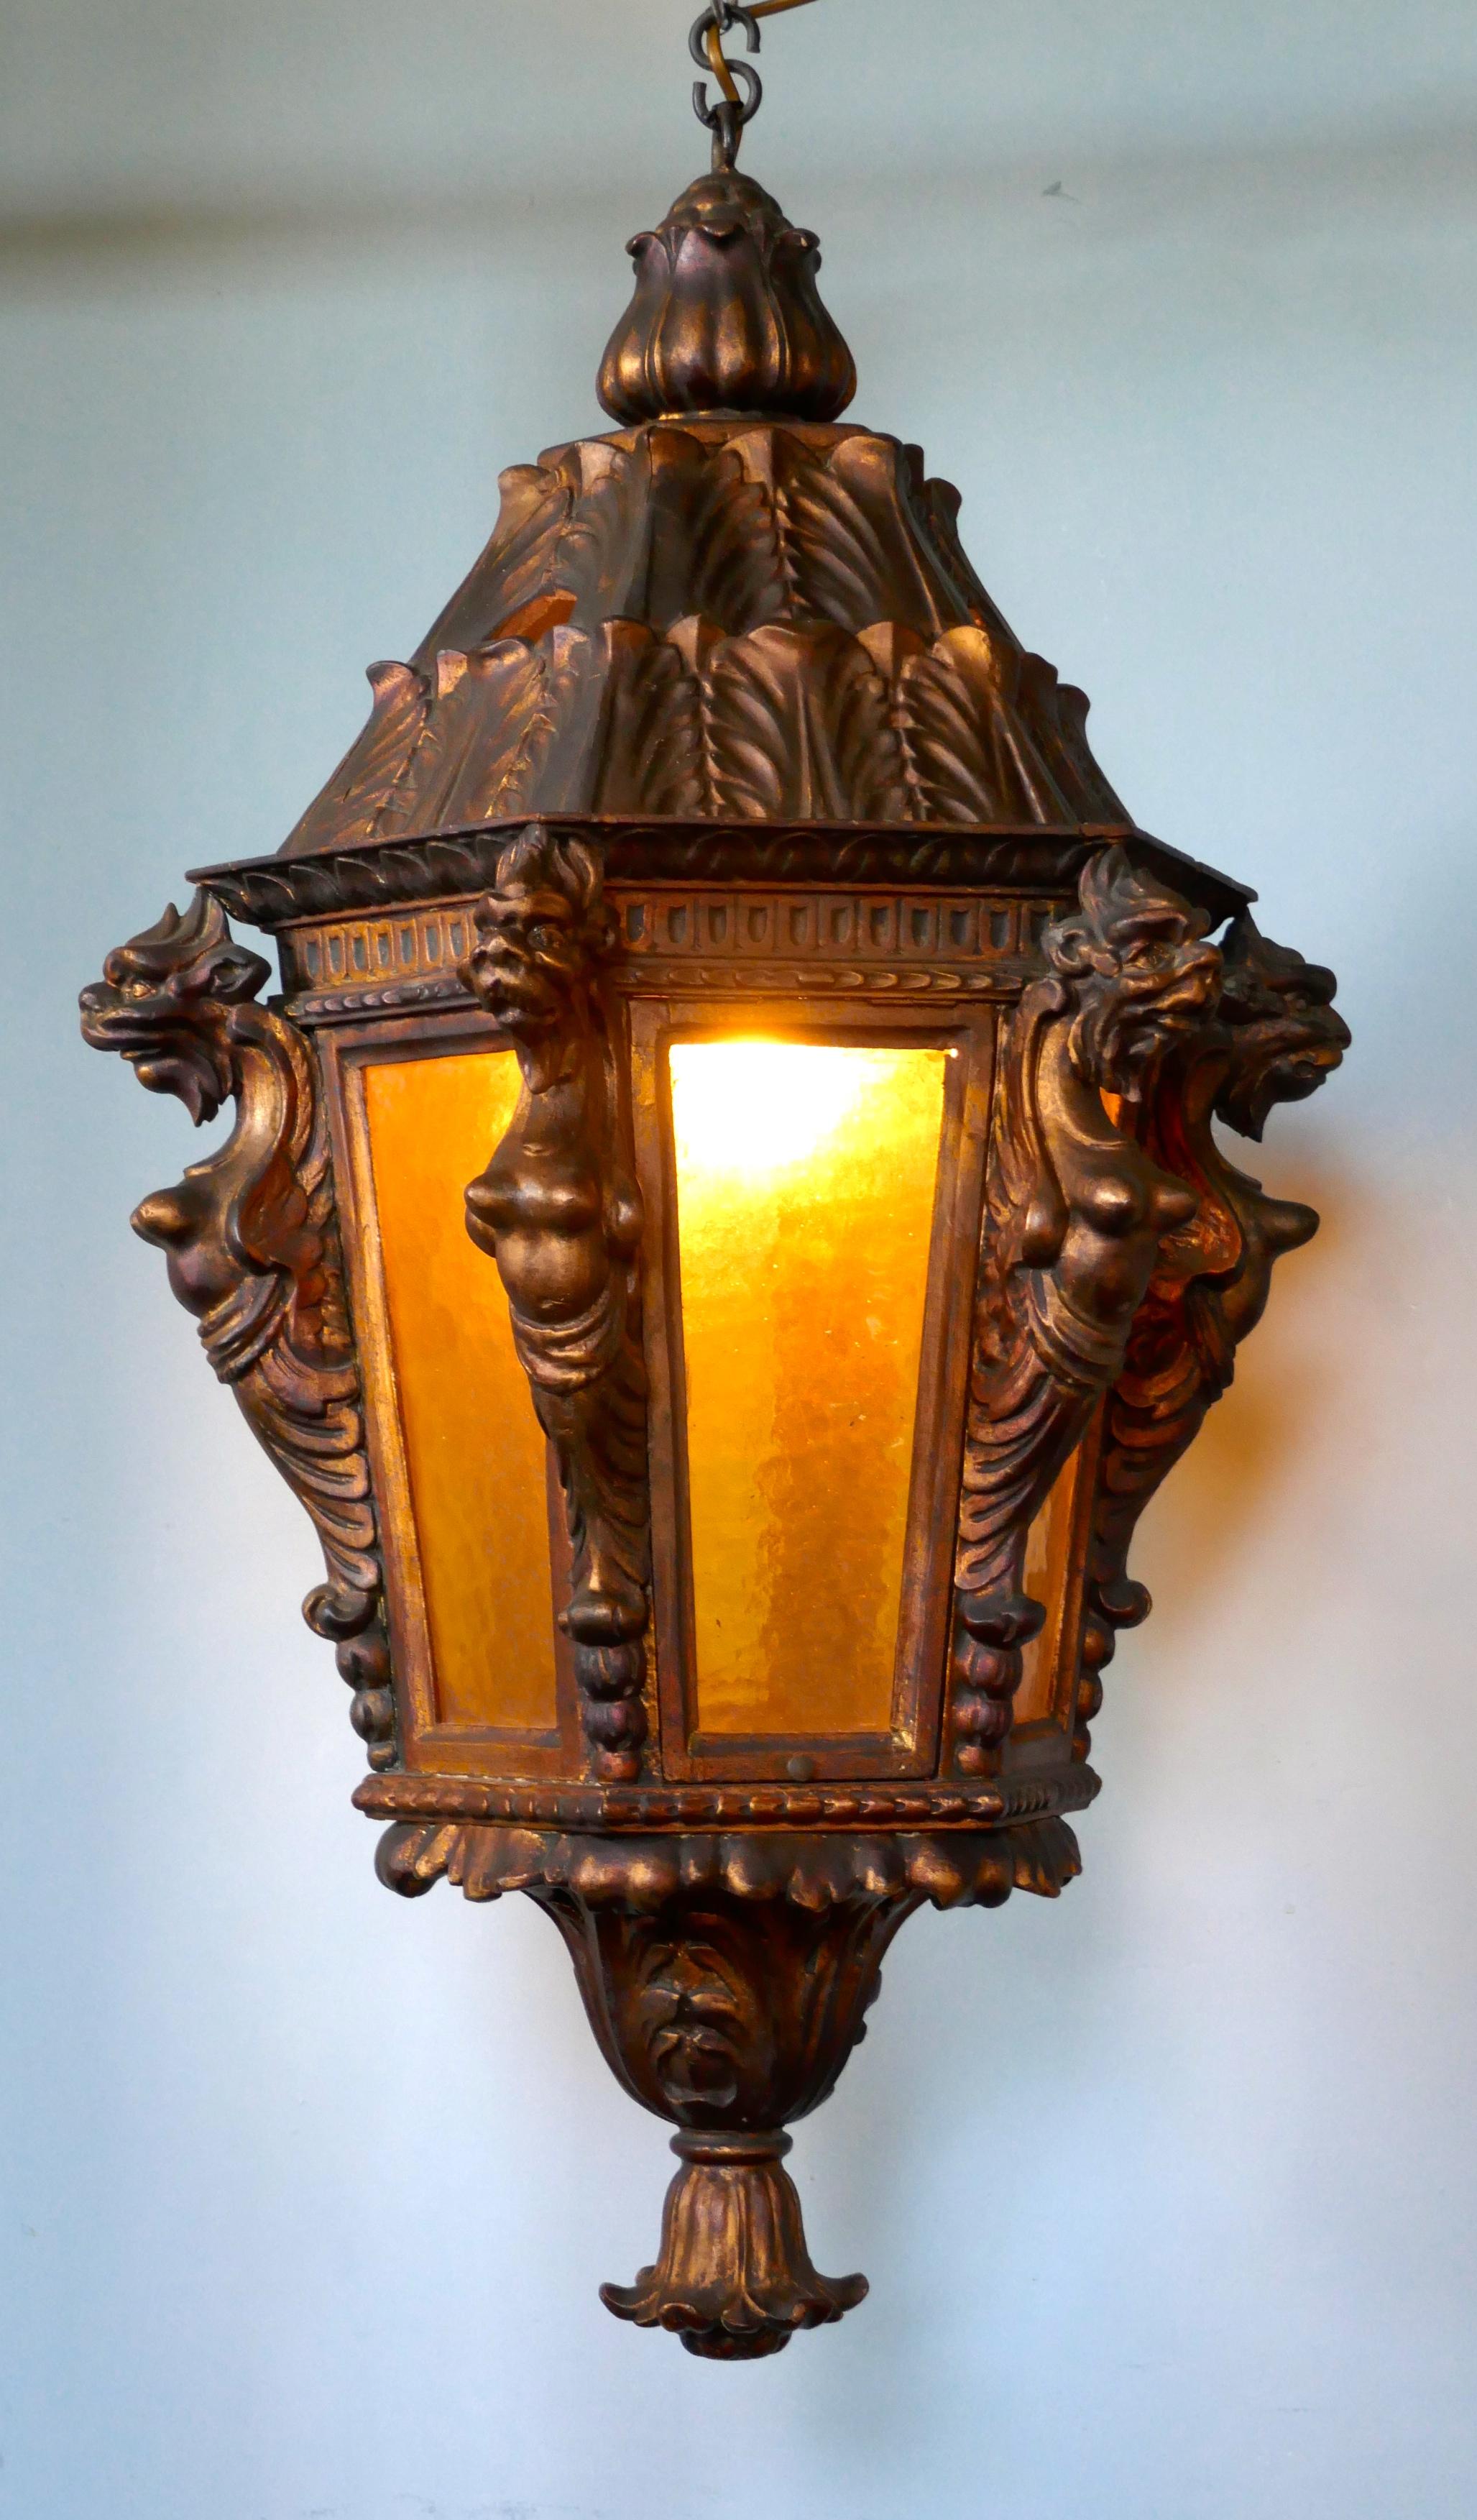 A large carved gilded wooden lantern from Theatre Royal Brighton

This piece originates from the Theatre Royal in Brighton which was built in 1806
This is a six-sided piece, the pagoda style roof has large ventilation holes which would have been